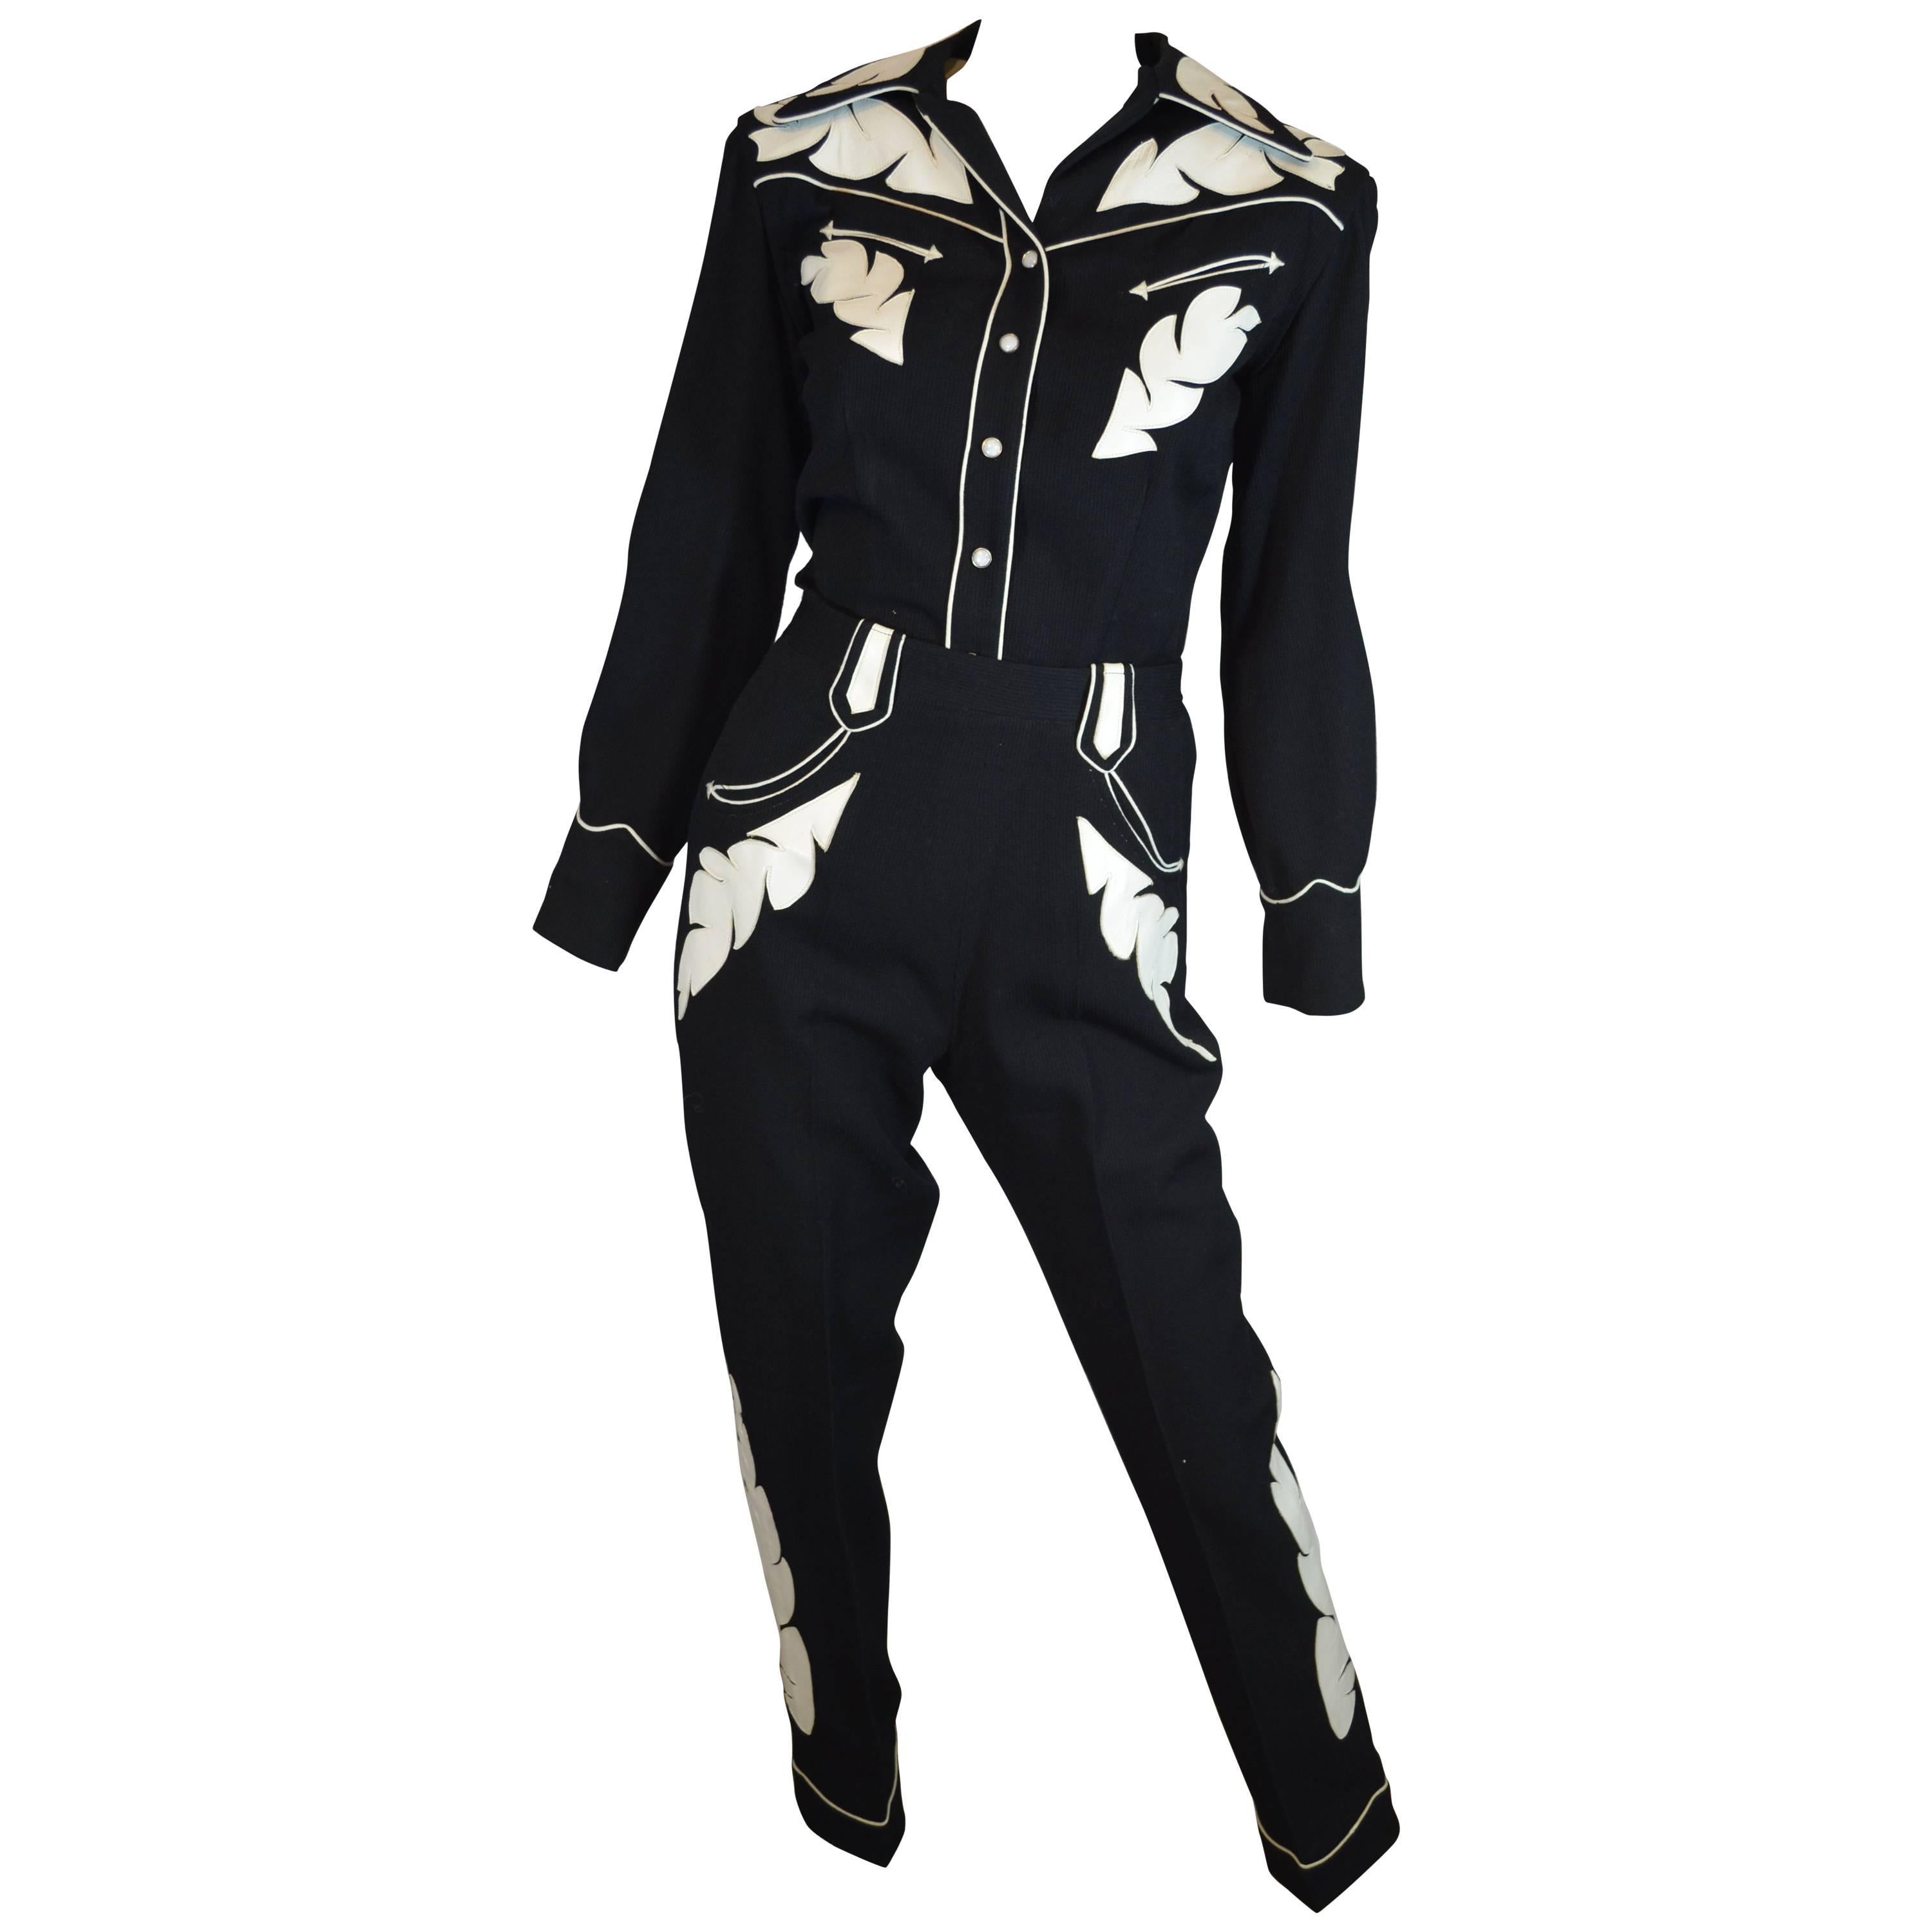 Nathan Turk Rodeo Suit 1959 worn by Terry Tydings 